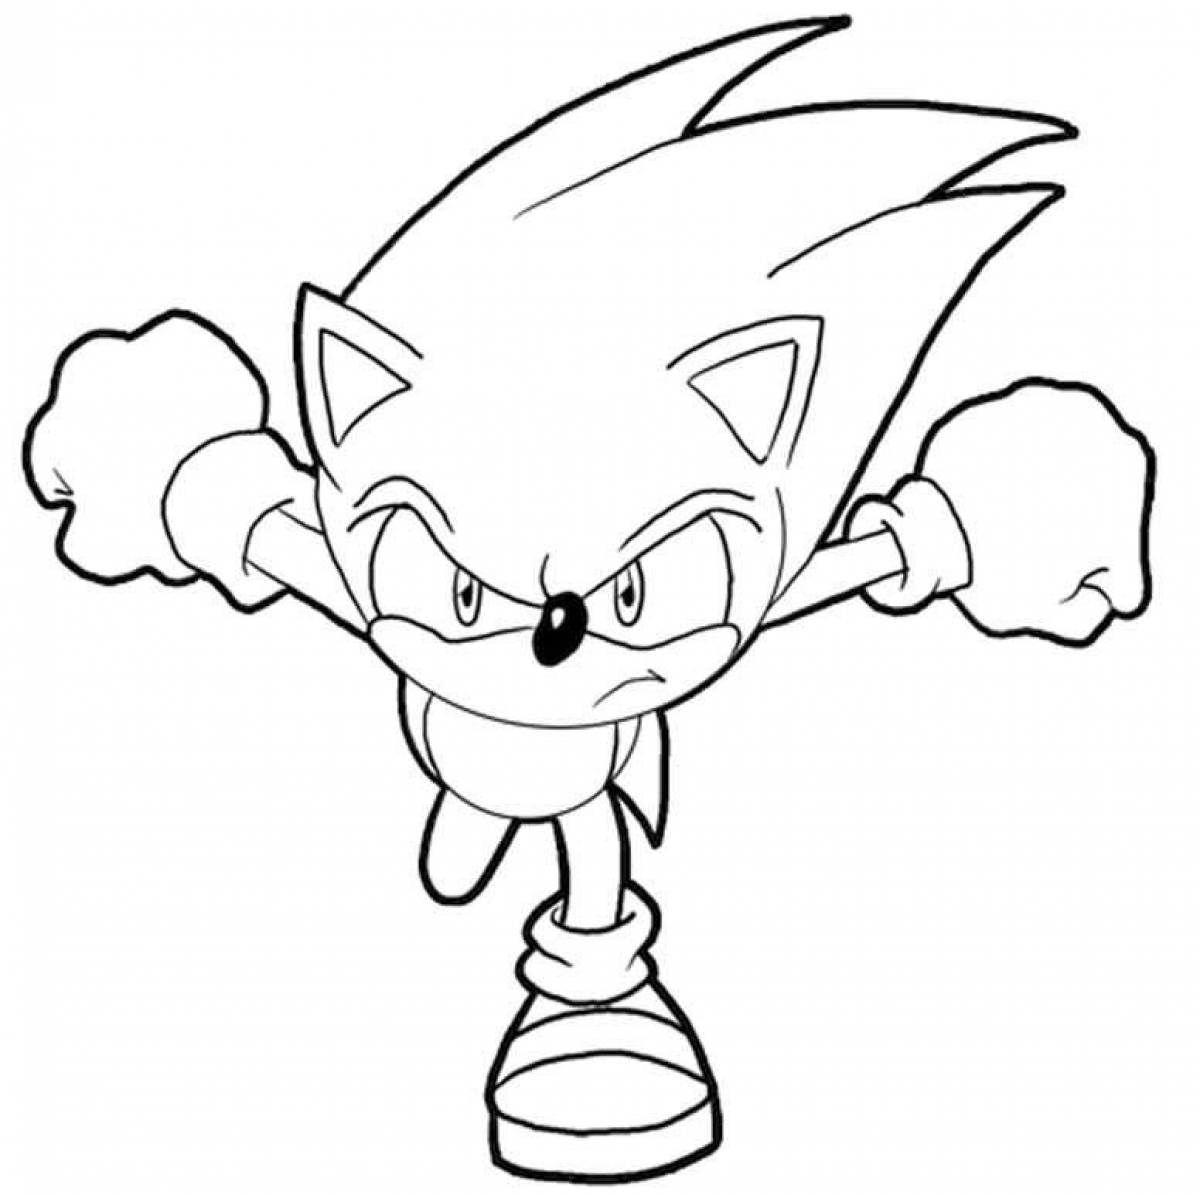 Funny sonic coloring book